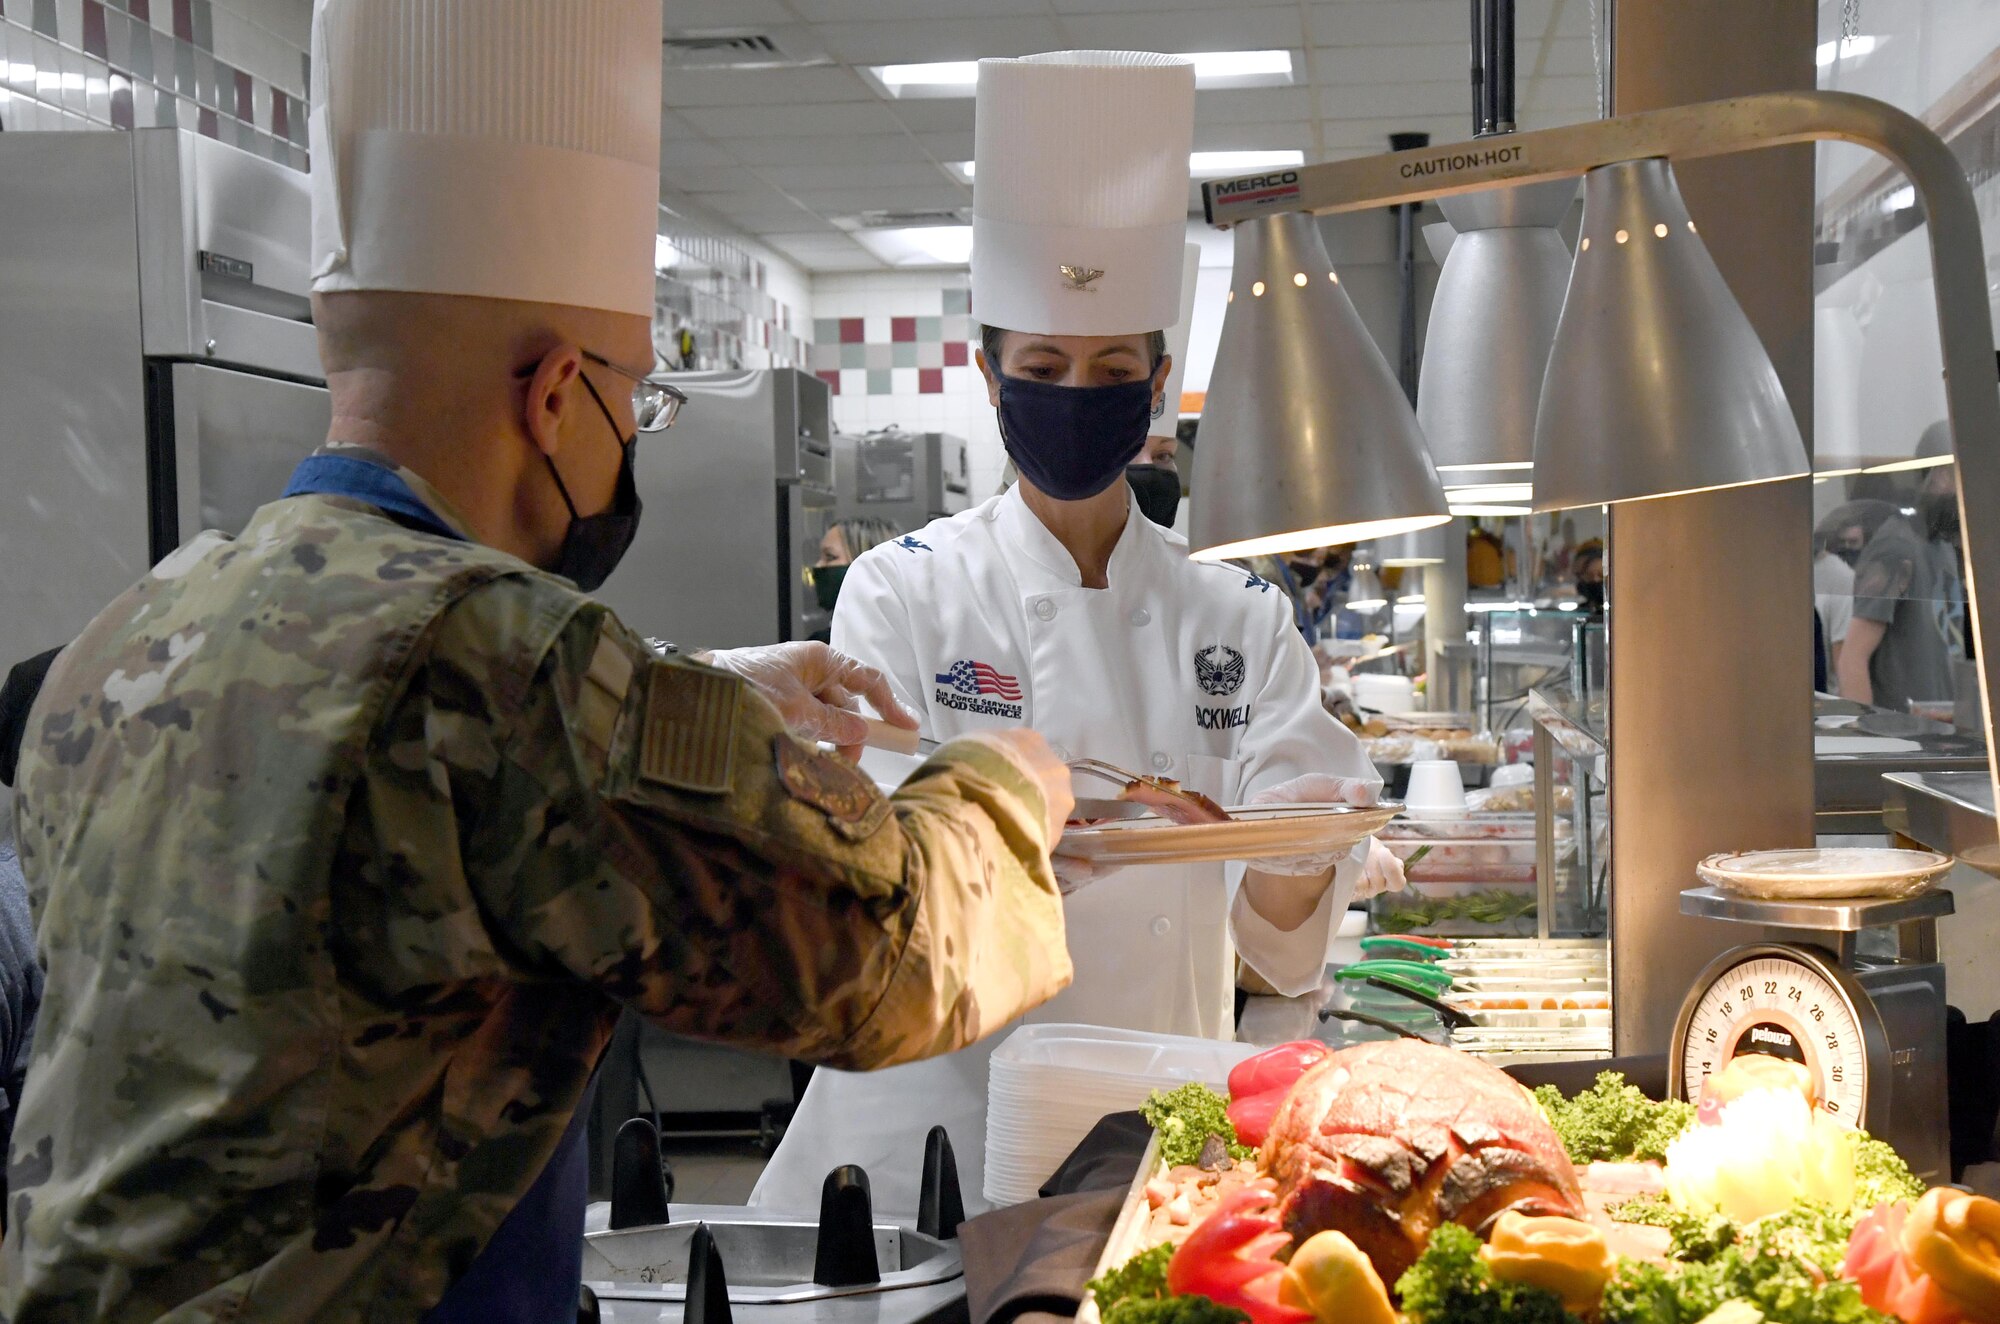 U.S. Air Force Col. Chance Geray, 81st Training Group commander, places a piece of ham on a plate for Col. Heather Blackwell, 81st Training Wing commander, inside the Azalea Dining Facility at Keesler Air Force Base, Mississippi, Nov. 26, 2020. It is tradition at Keesler for commanders, first sergeants and superintendents to serve a Thanksgiving meal at the dining facility to technical training and permanent party Airmen who are not able to go home for the holiday. (U.S. Air Force photo by Kemberly Groue)